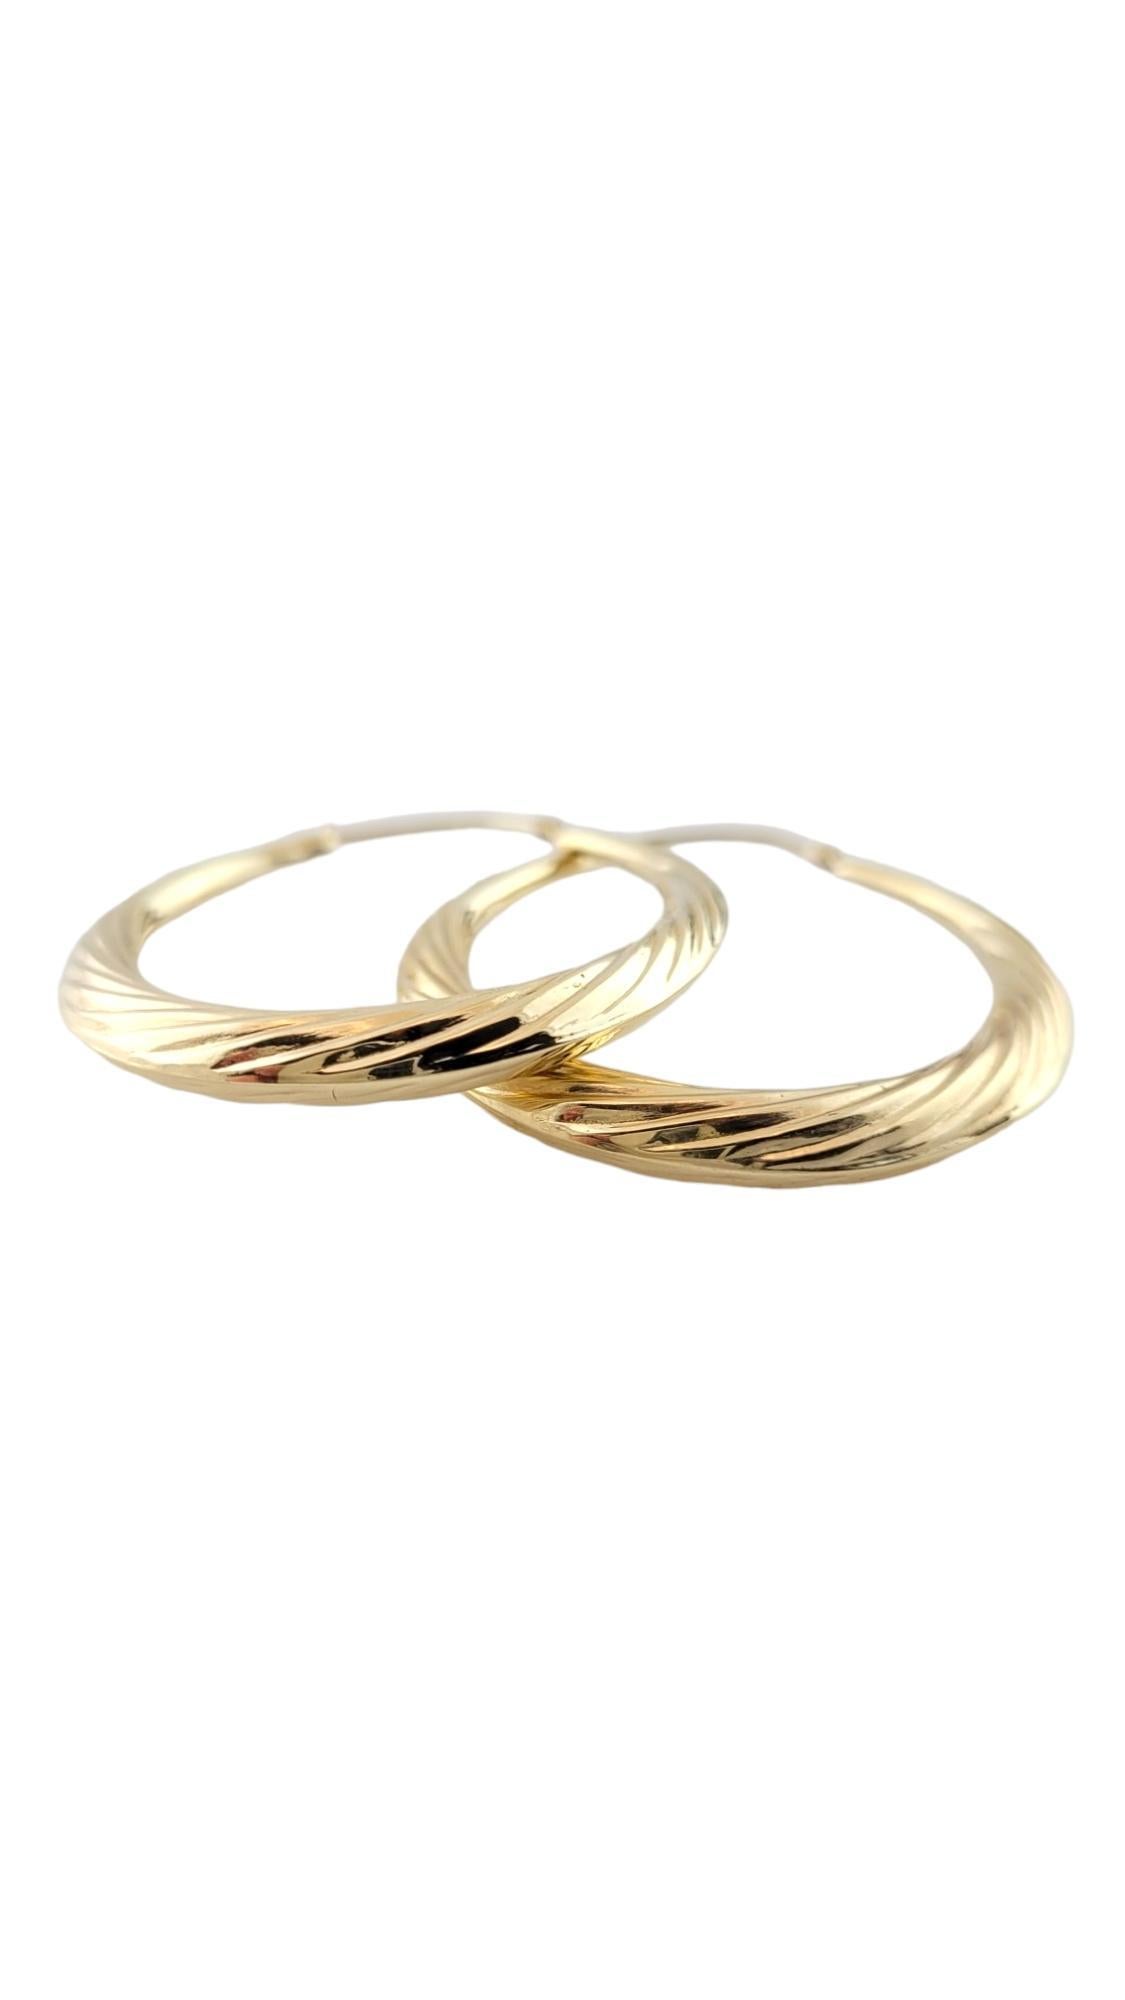 14K Yellow Gold Twist Hoop Earrings #16259 In Good Condition For Sale In Washington Depot, CT